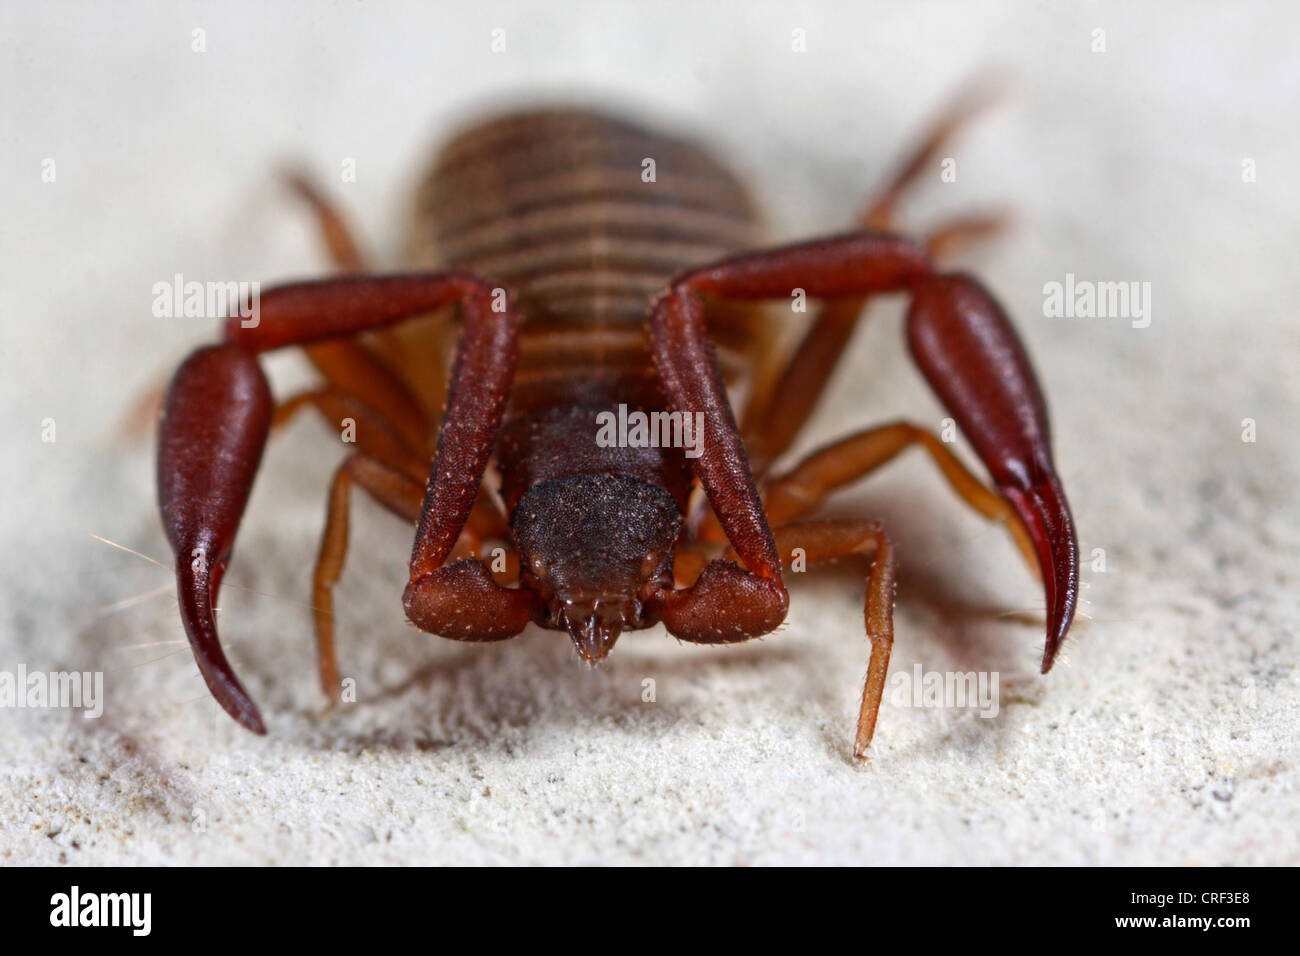 house pseudoscorpion (Chelifer cancroides), on page Stock Photo